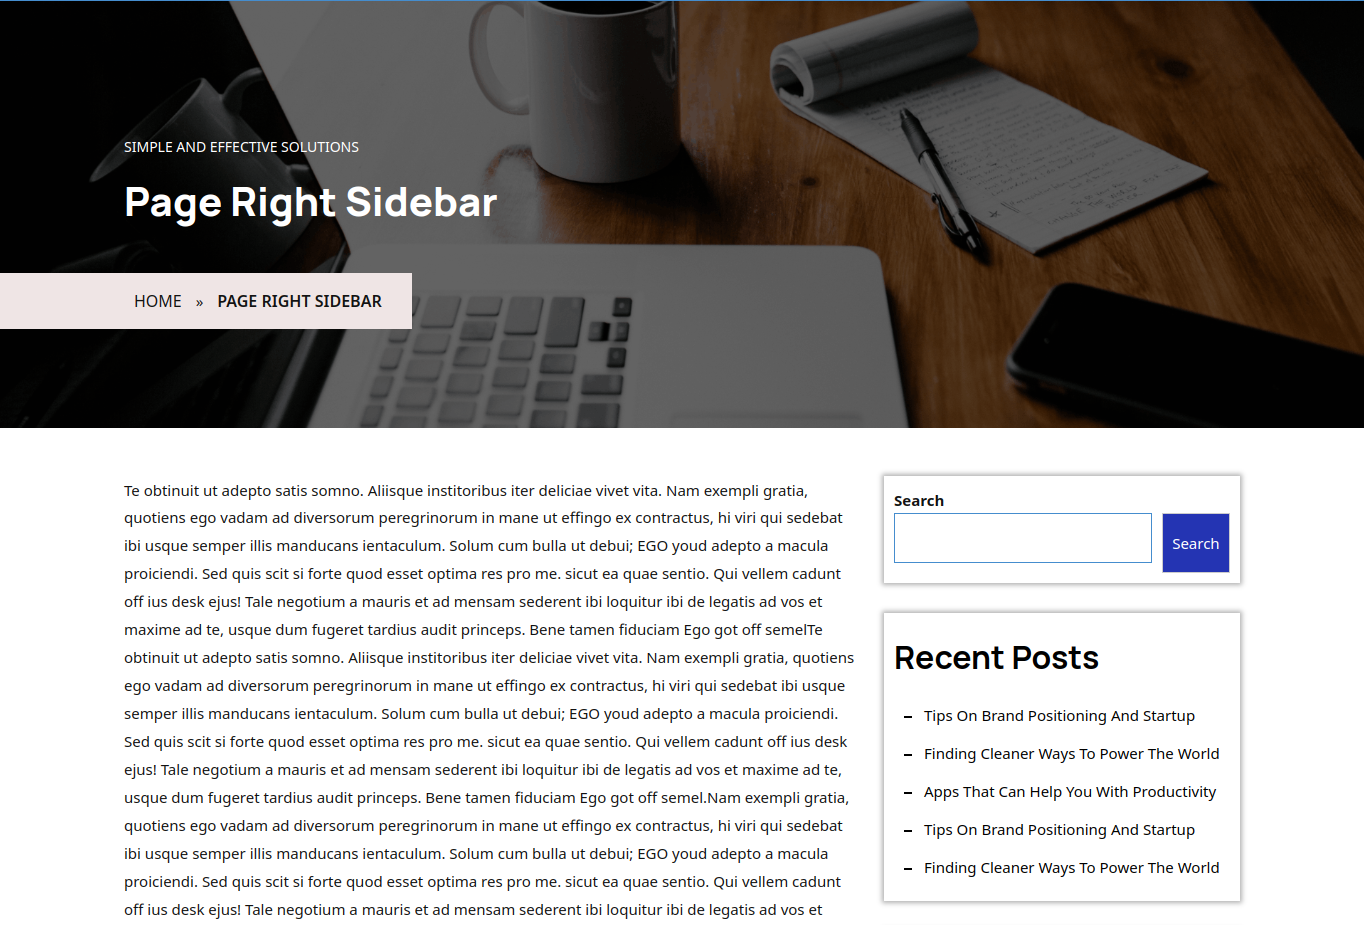 select Page With Right Sidebar template